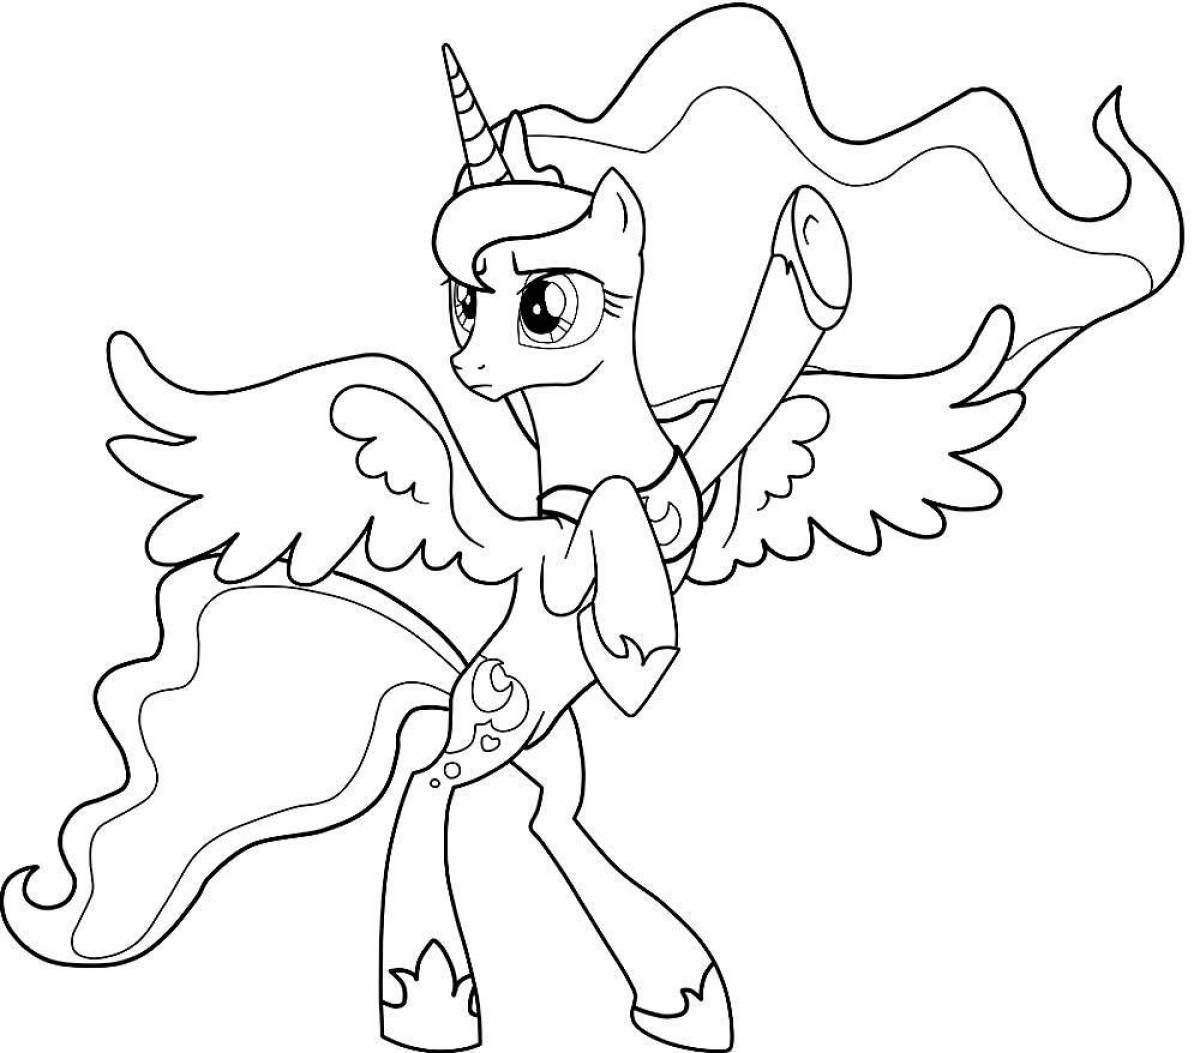 Crunchy pony coloring page